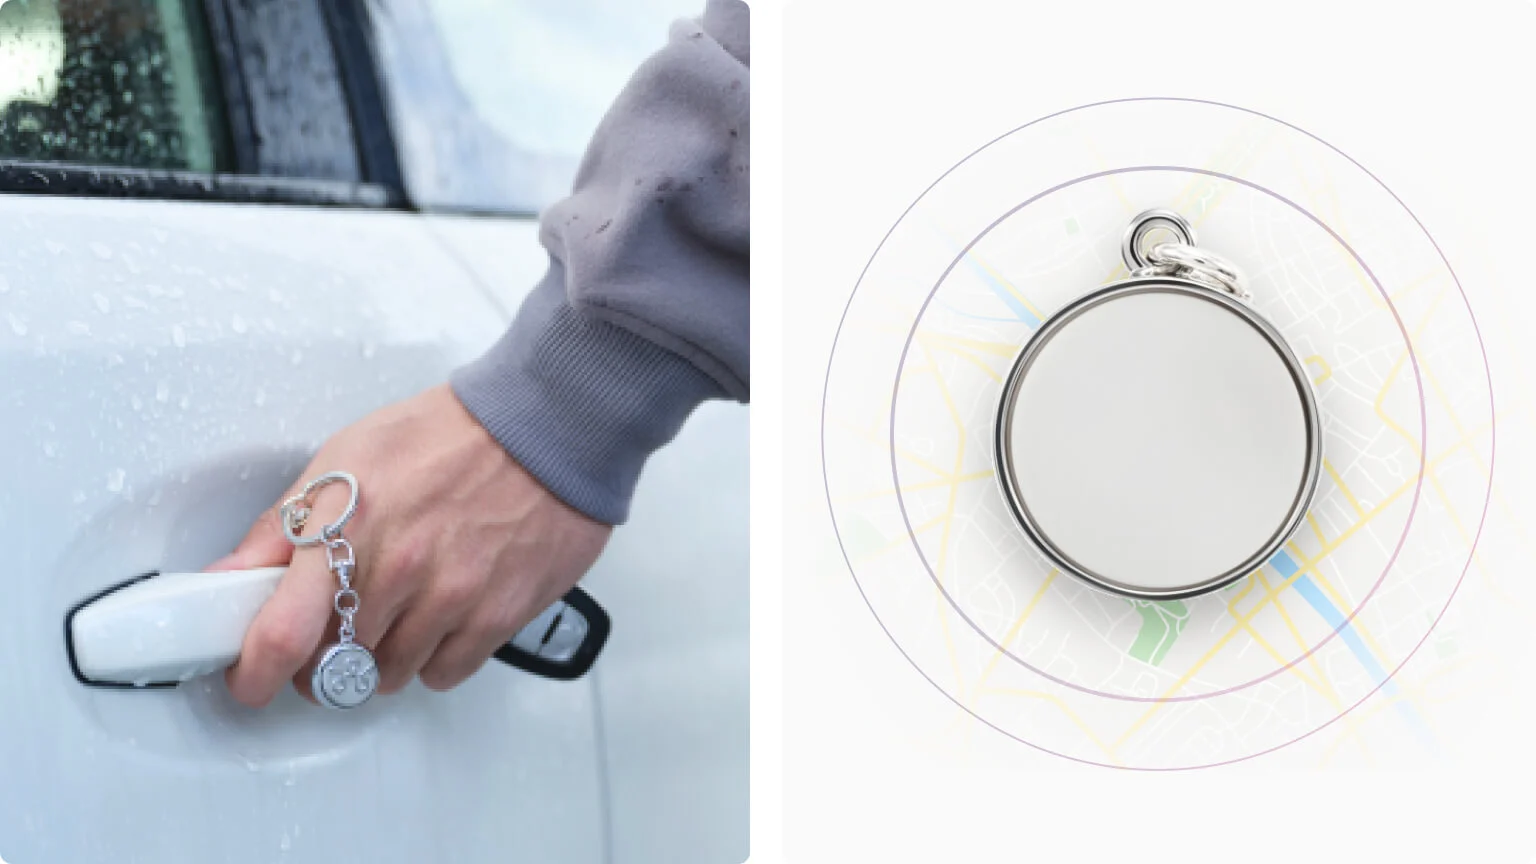 An image with the TELUS and Invisawear logos together, showing the TELUS SmartWear security device in someone’s hand as part of their key chain, and emitting a signal to indicate location.